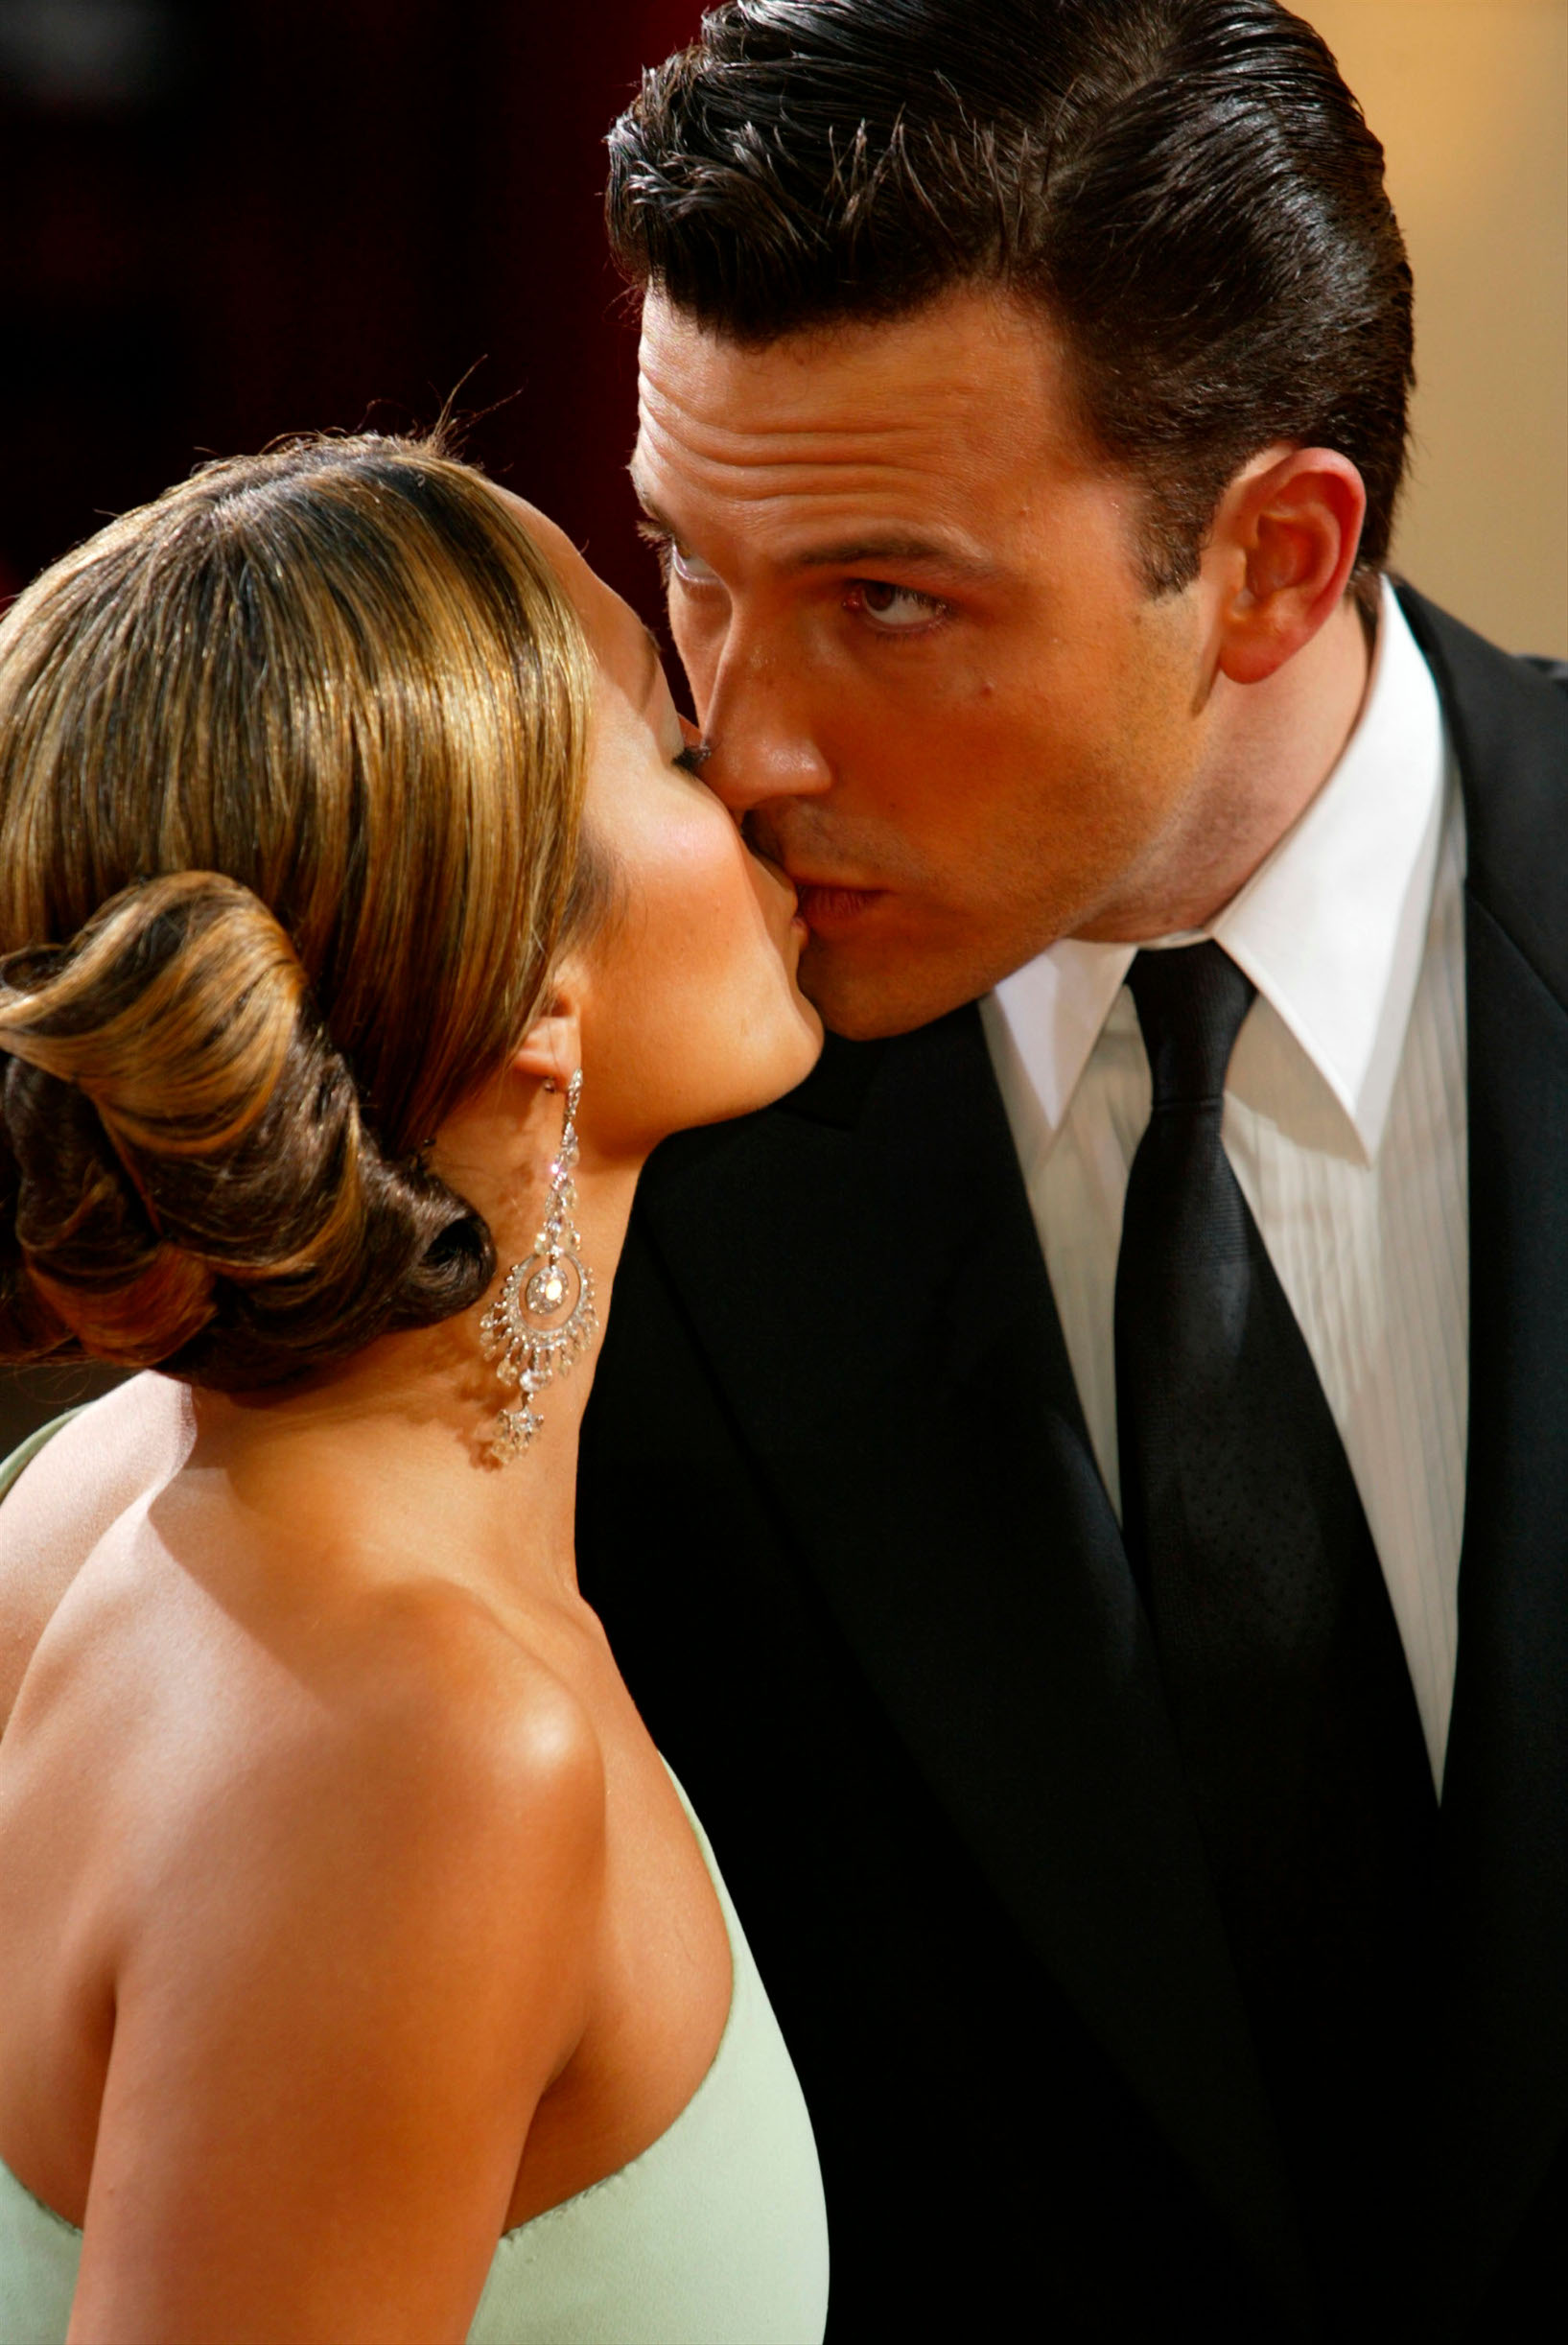 HOLLYWOOD - MARCH 23:  Actor Ben Affleck kisses fiancee, actress Jennifer Lopez, wearing Harry Winston jewelry, at the 75th Annual Academy Awards at the Kodak Theater on March 23, 2003 in Hollywood, California.  (Photo by Kevin Winter/Getty Images)